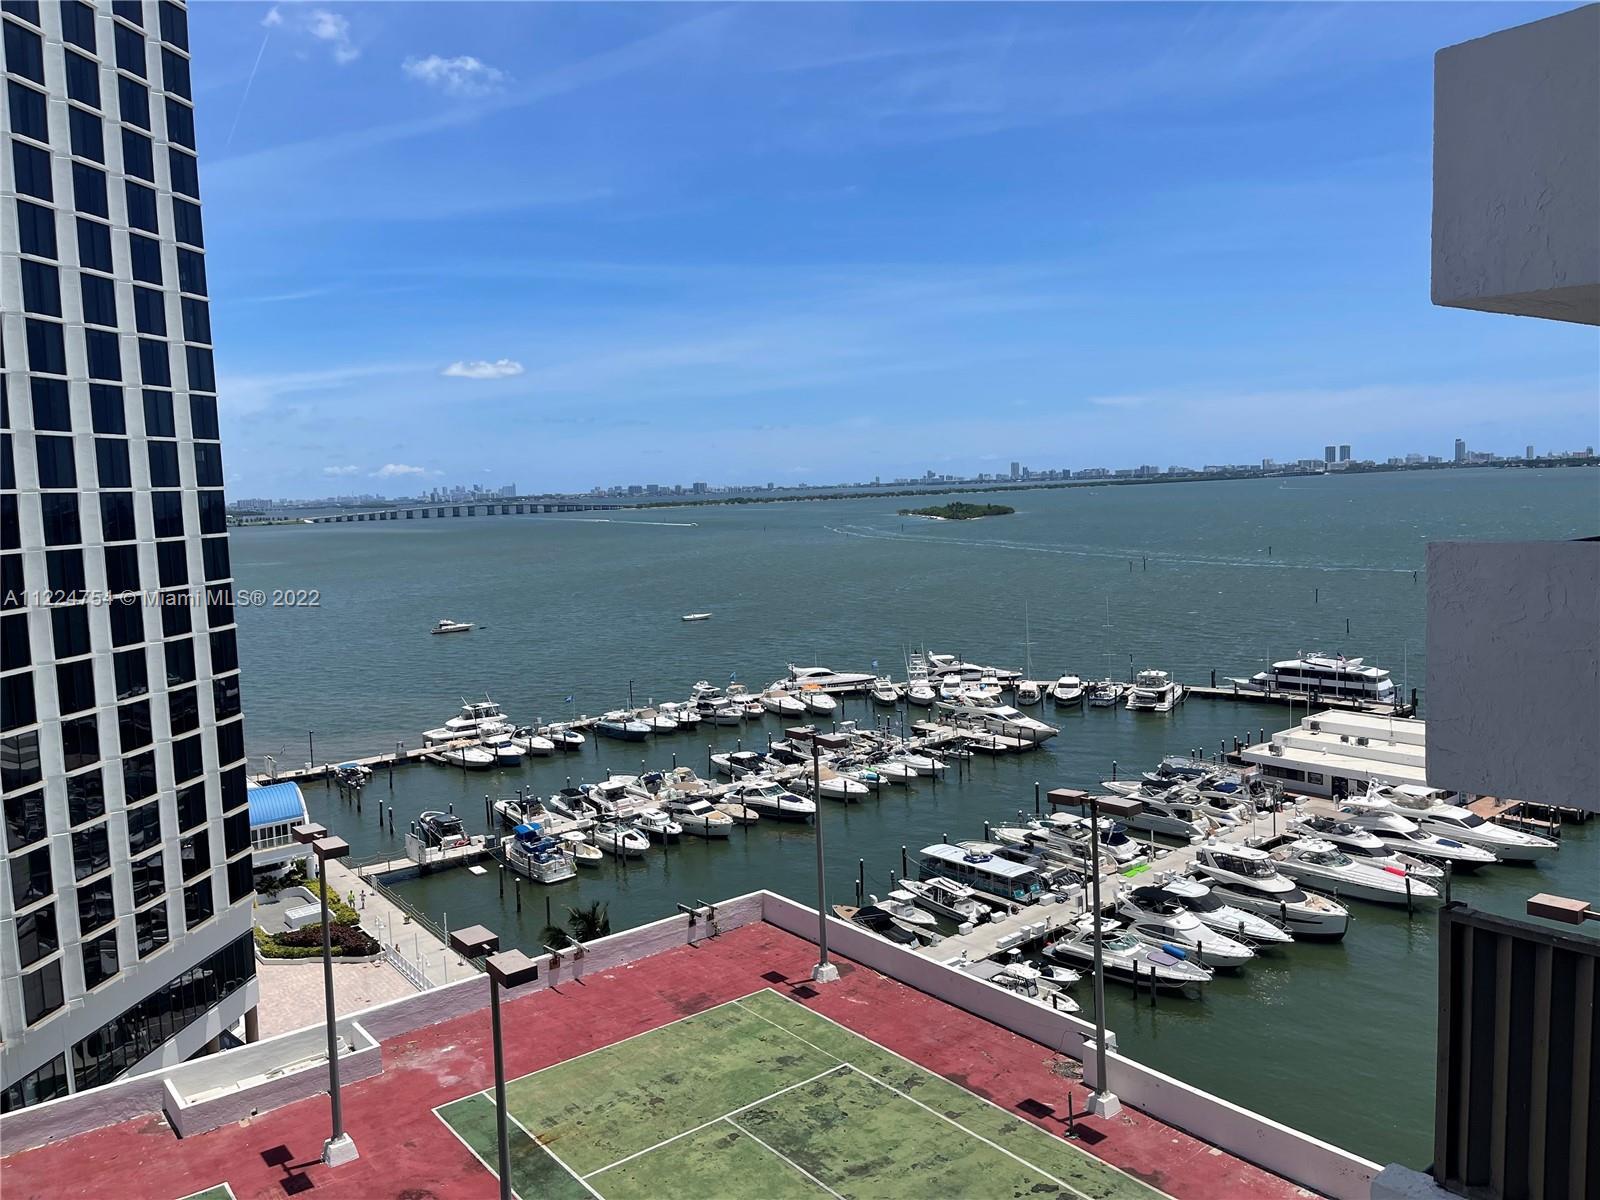 WATERFRONT HIGH RISE CONDO WITH ALL AMENITIES IN VENETIAN CAUSEWAY AND EAST OF US 1. EXCELLENT BAY F